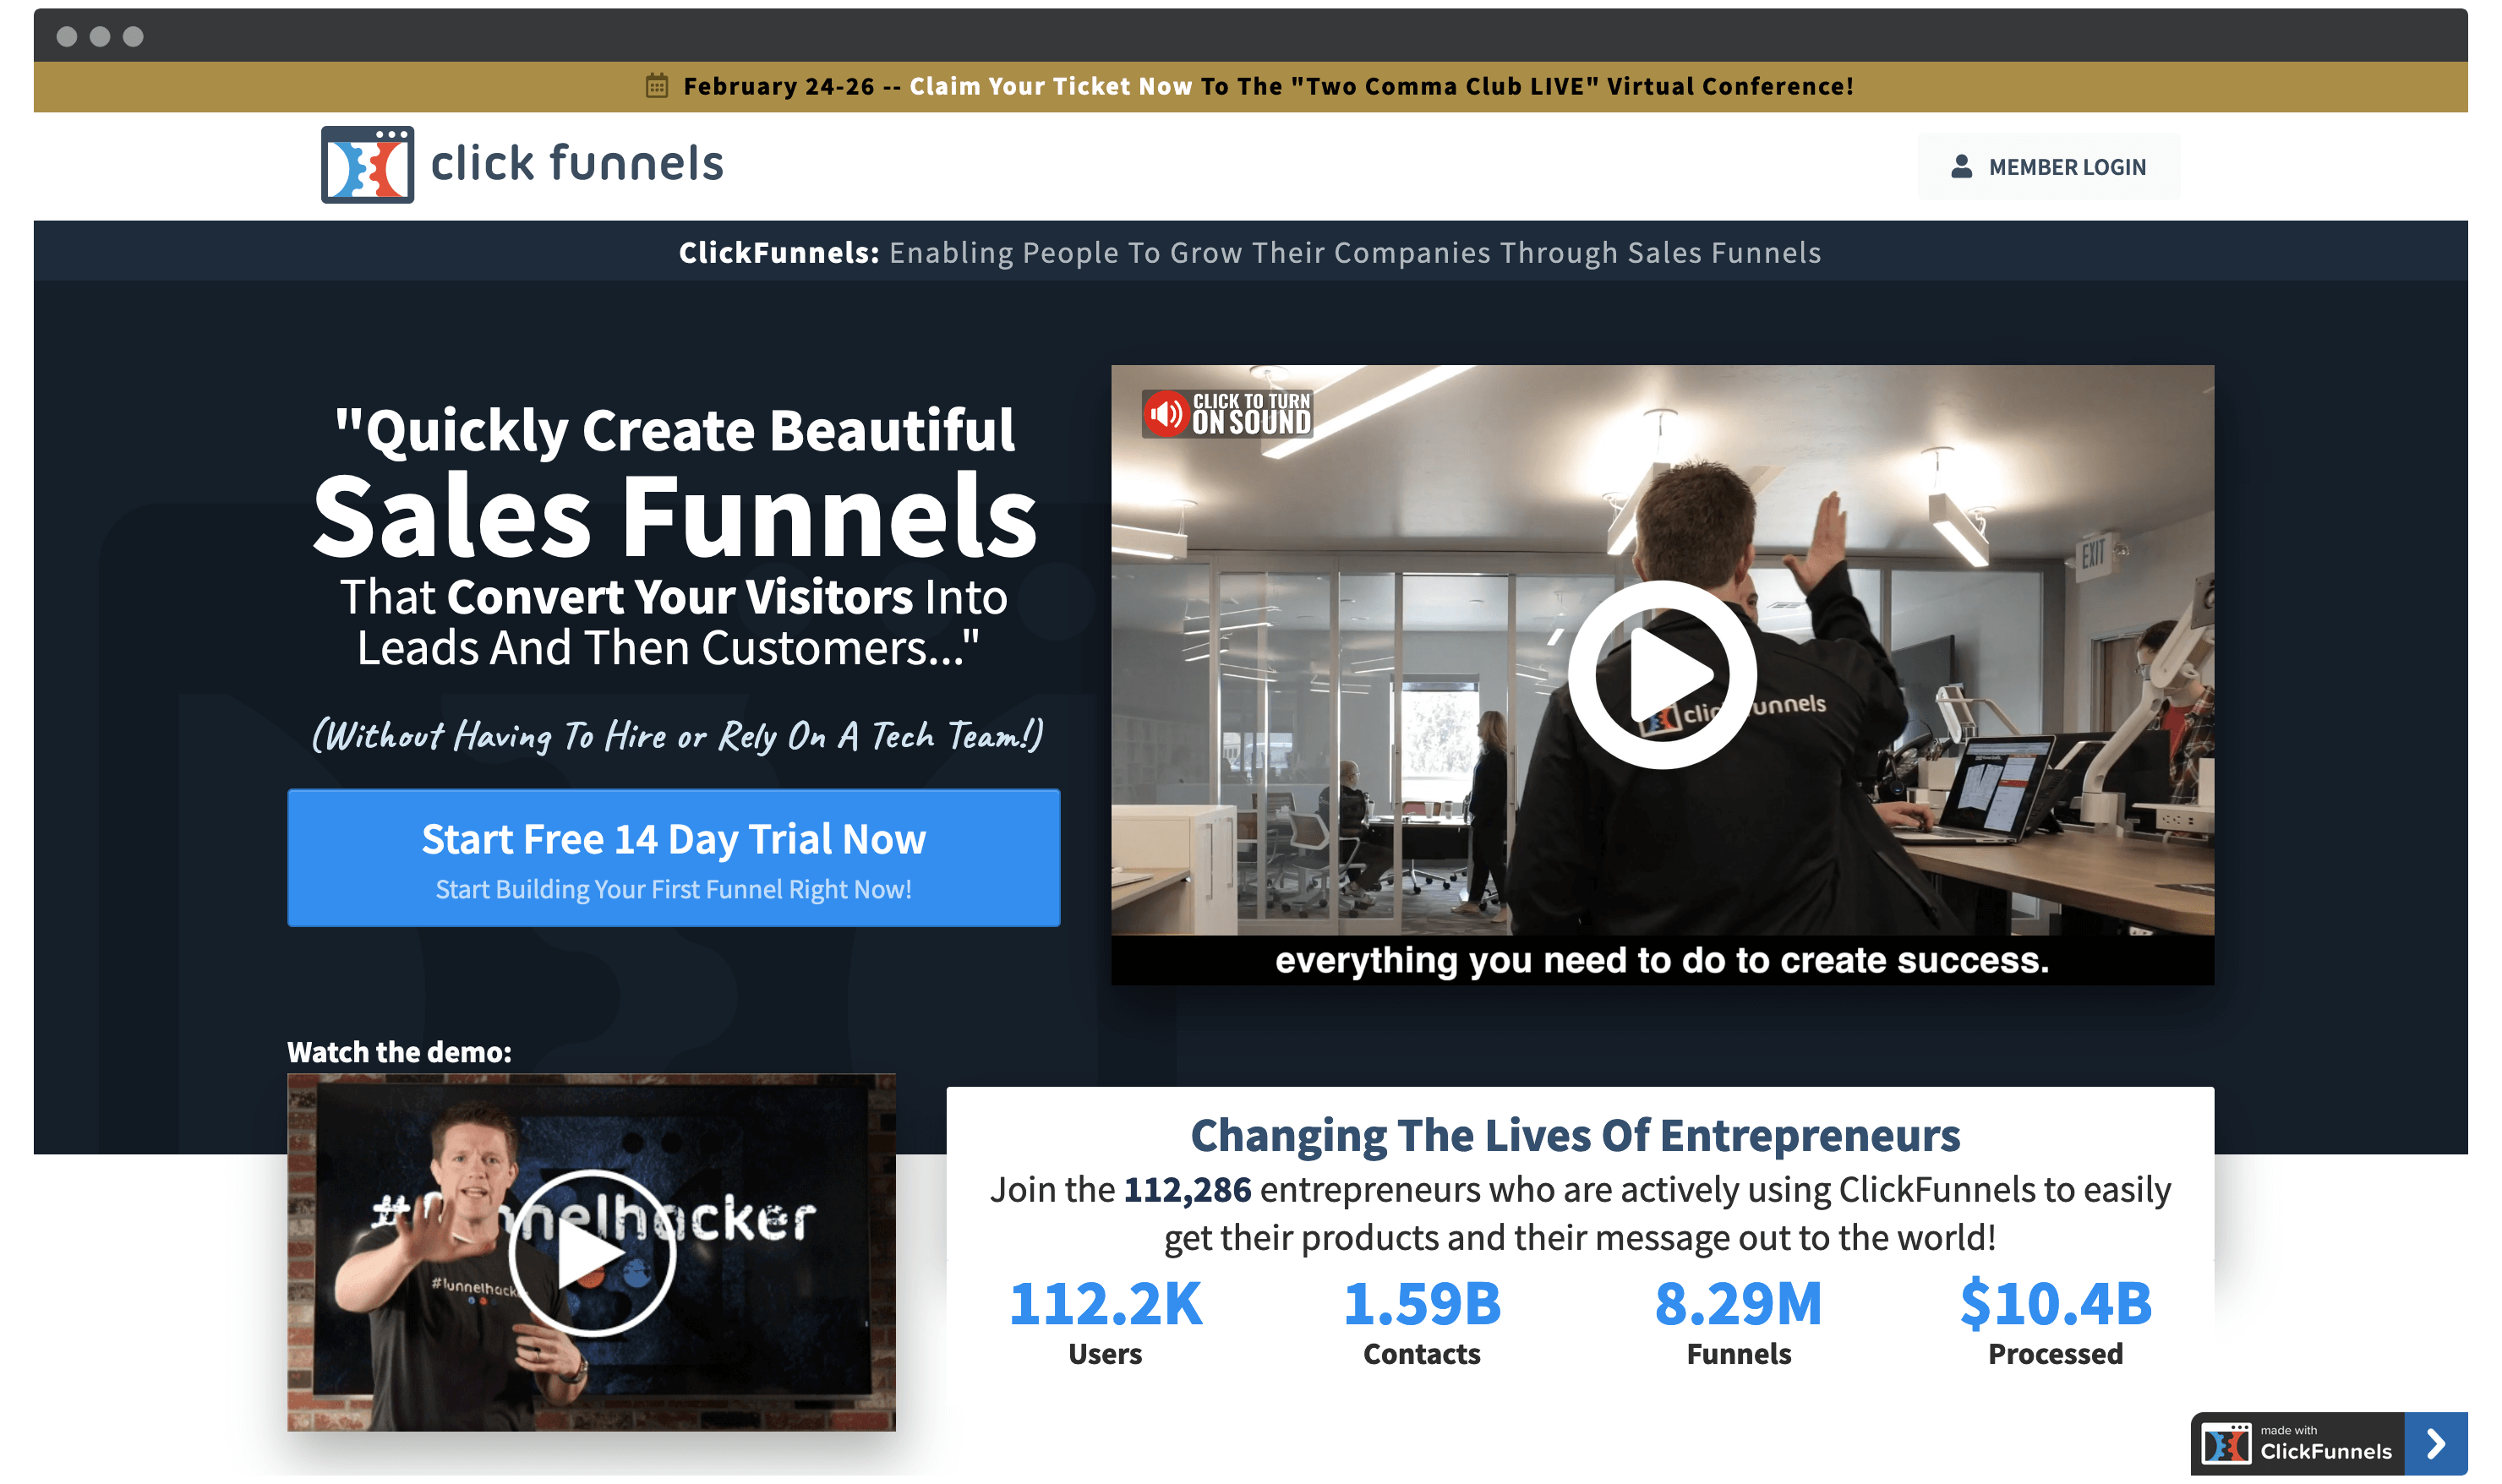 The ClickFunnels home page.